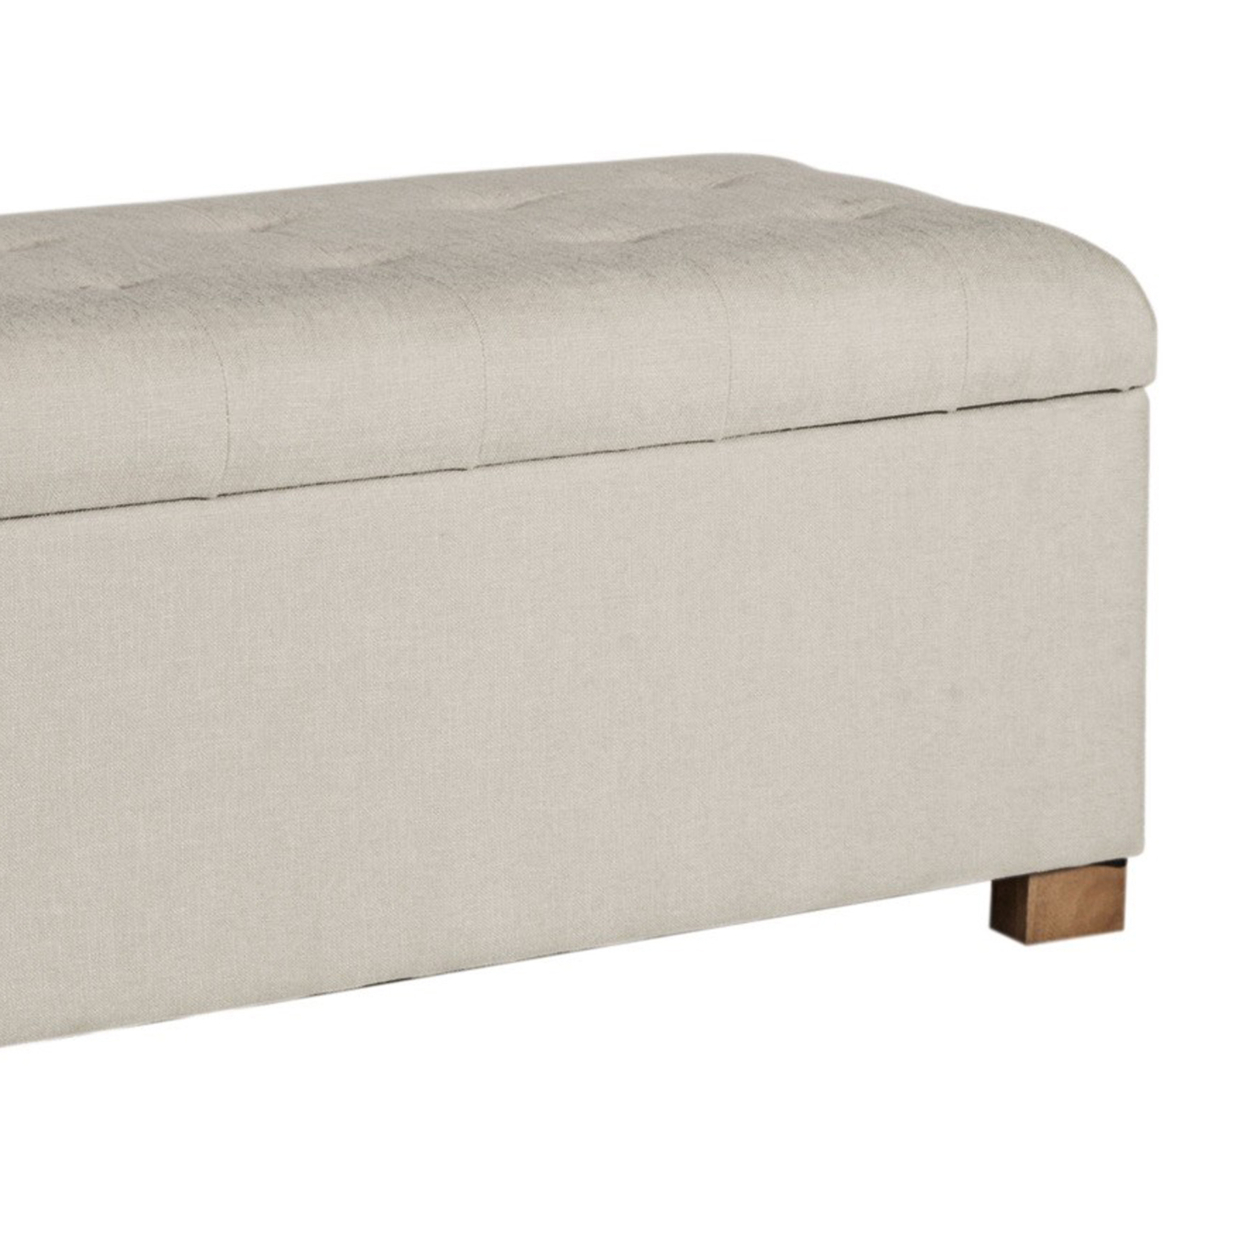 Polyester Upholstery Bench With Button Tufted Hinged Lid Storage And Wood Feet, Large, Light Gray- Saltoro Sherpi